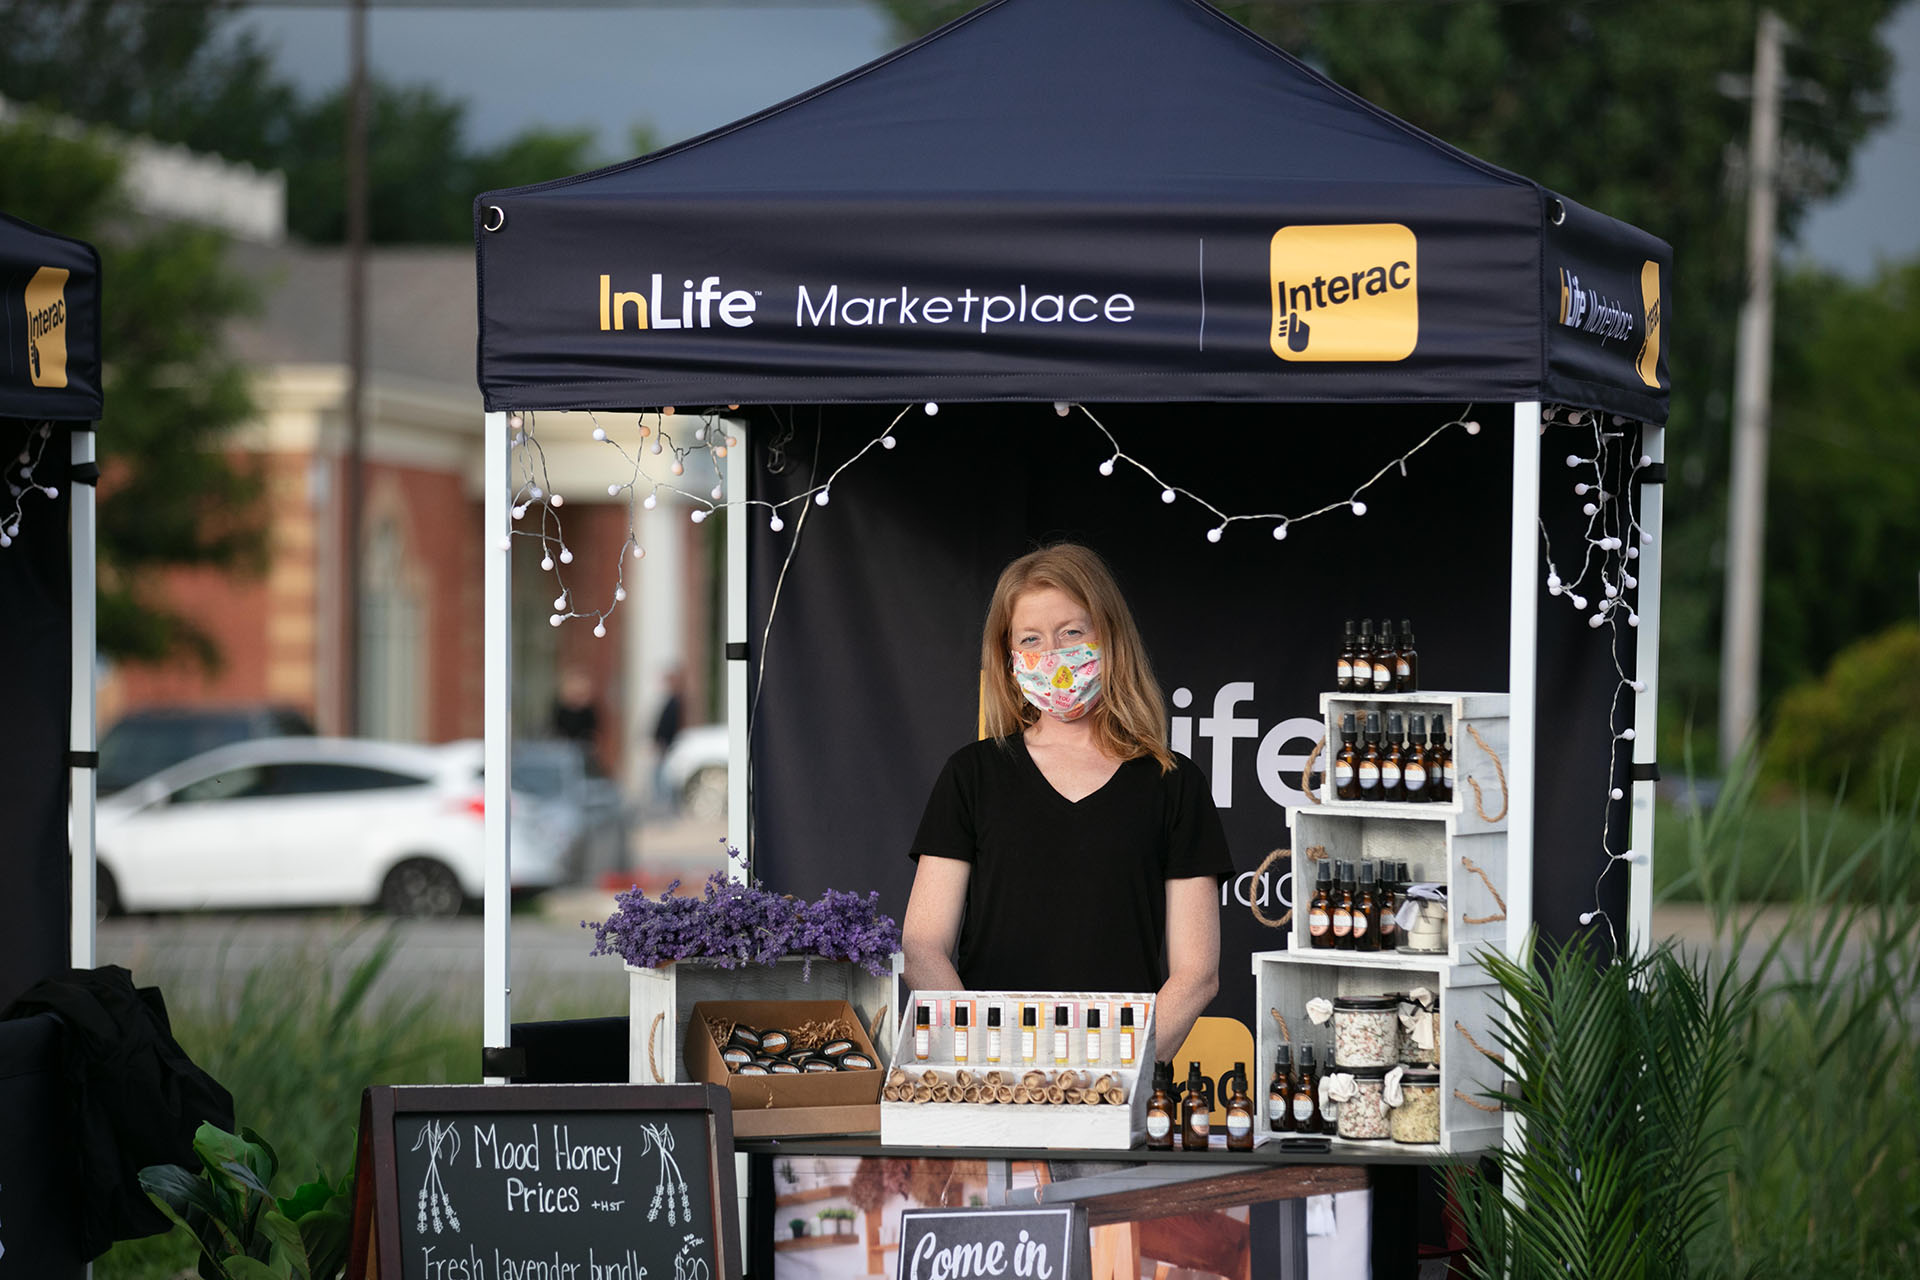 A woman wearing a mask standing at a InLife Marketplace sample stand